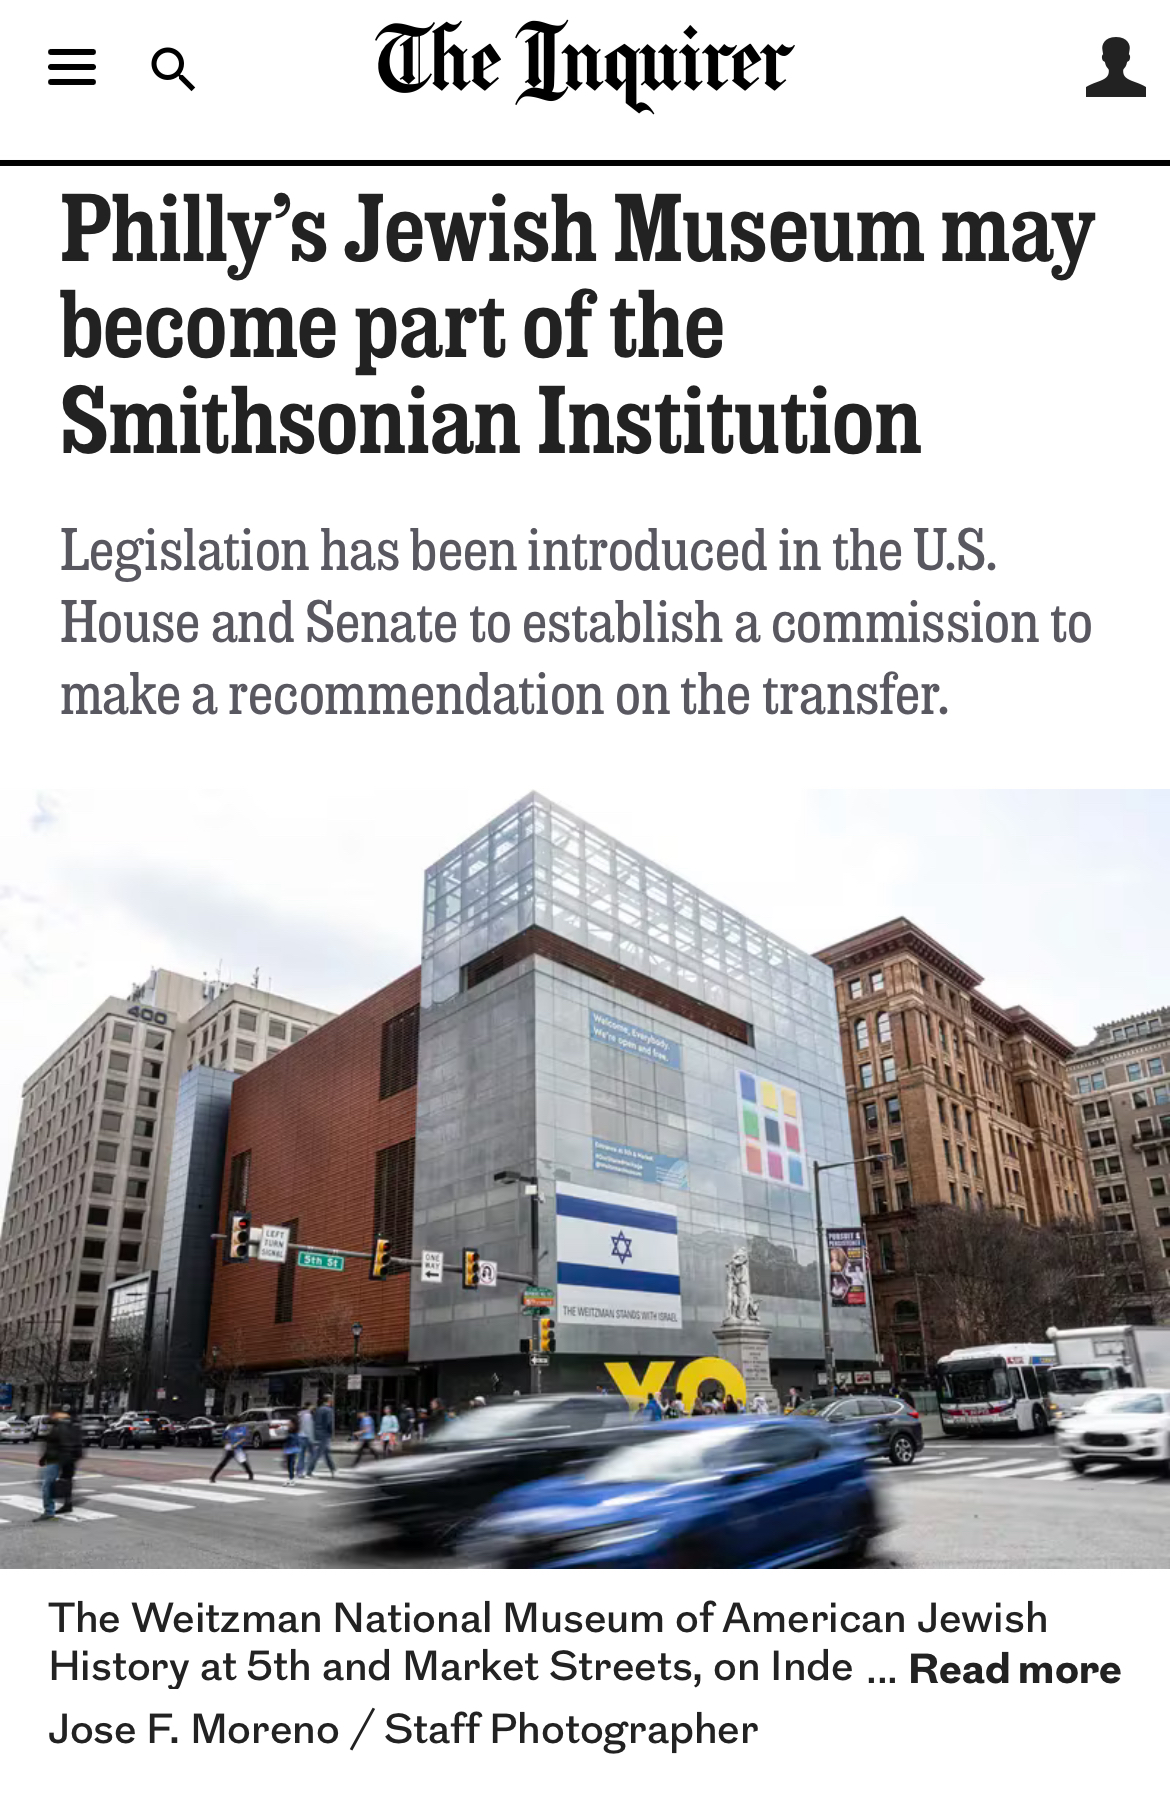 Weitzman National Museum of American Jewish History could become part of the Smithsonian